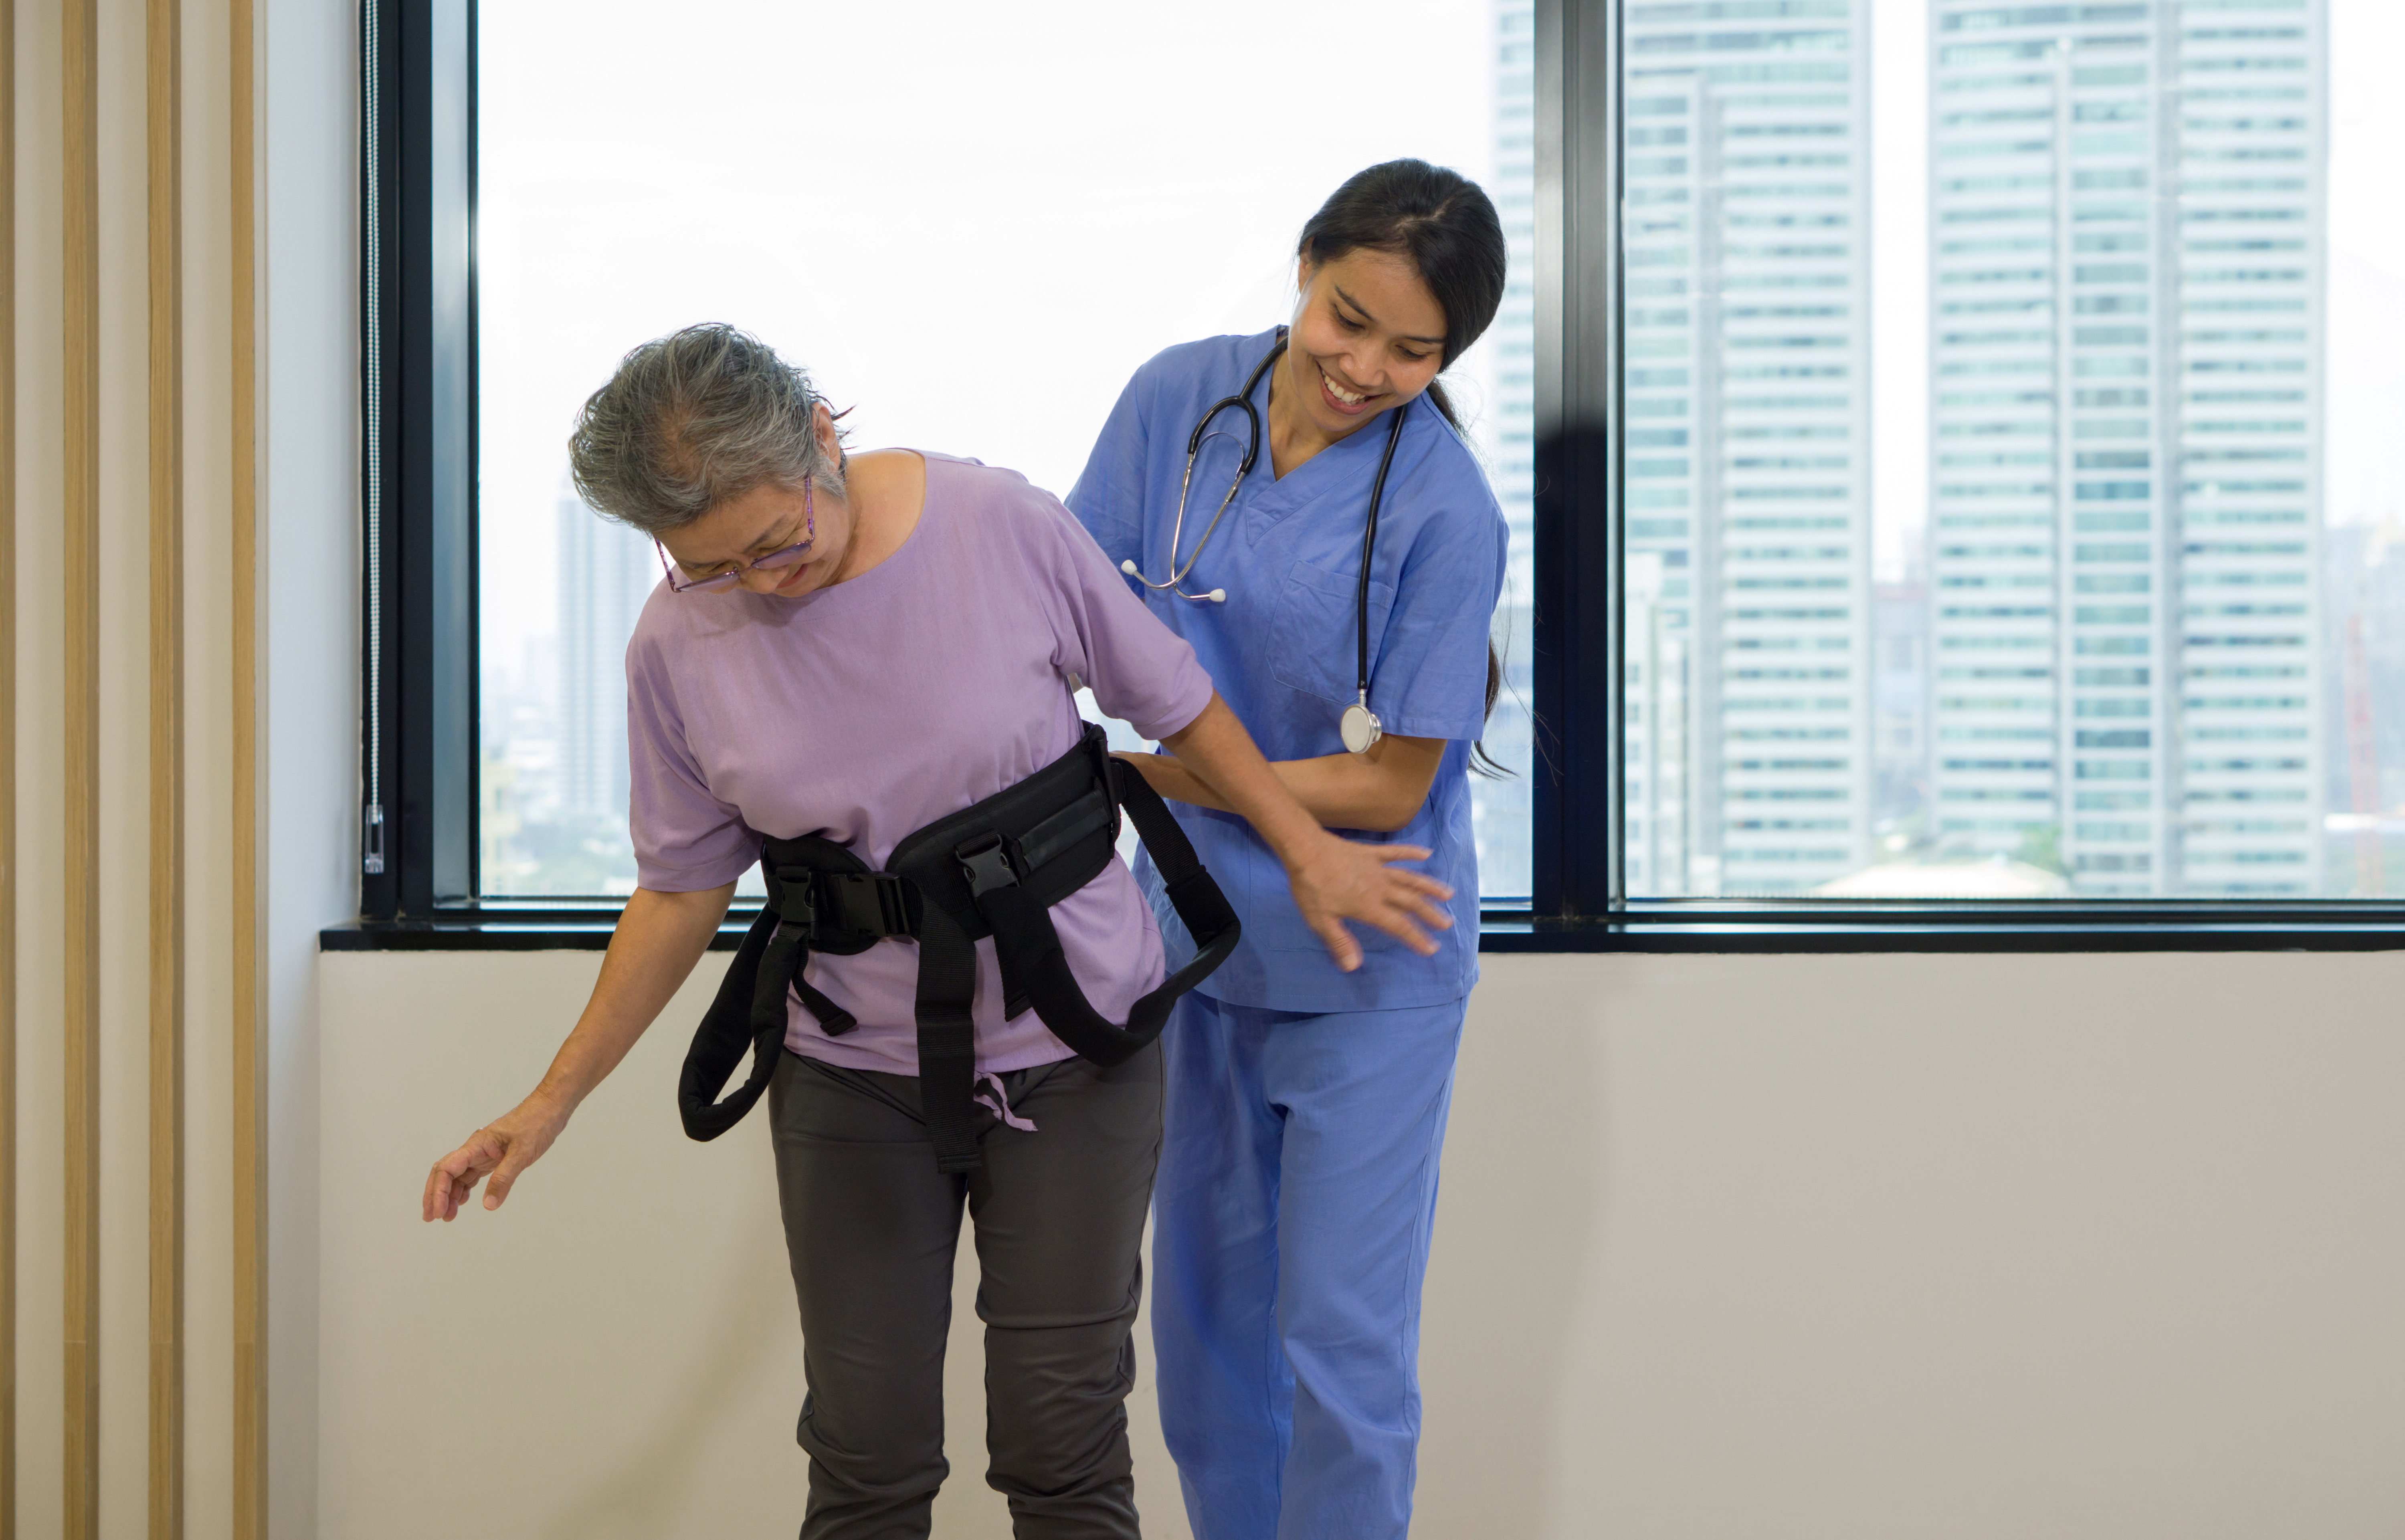 Woman working on walking with a health care worker